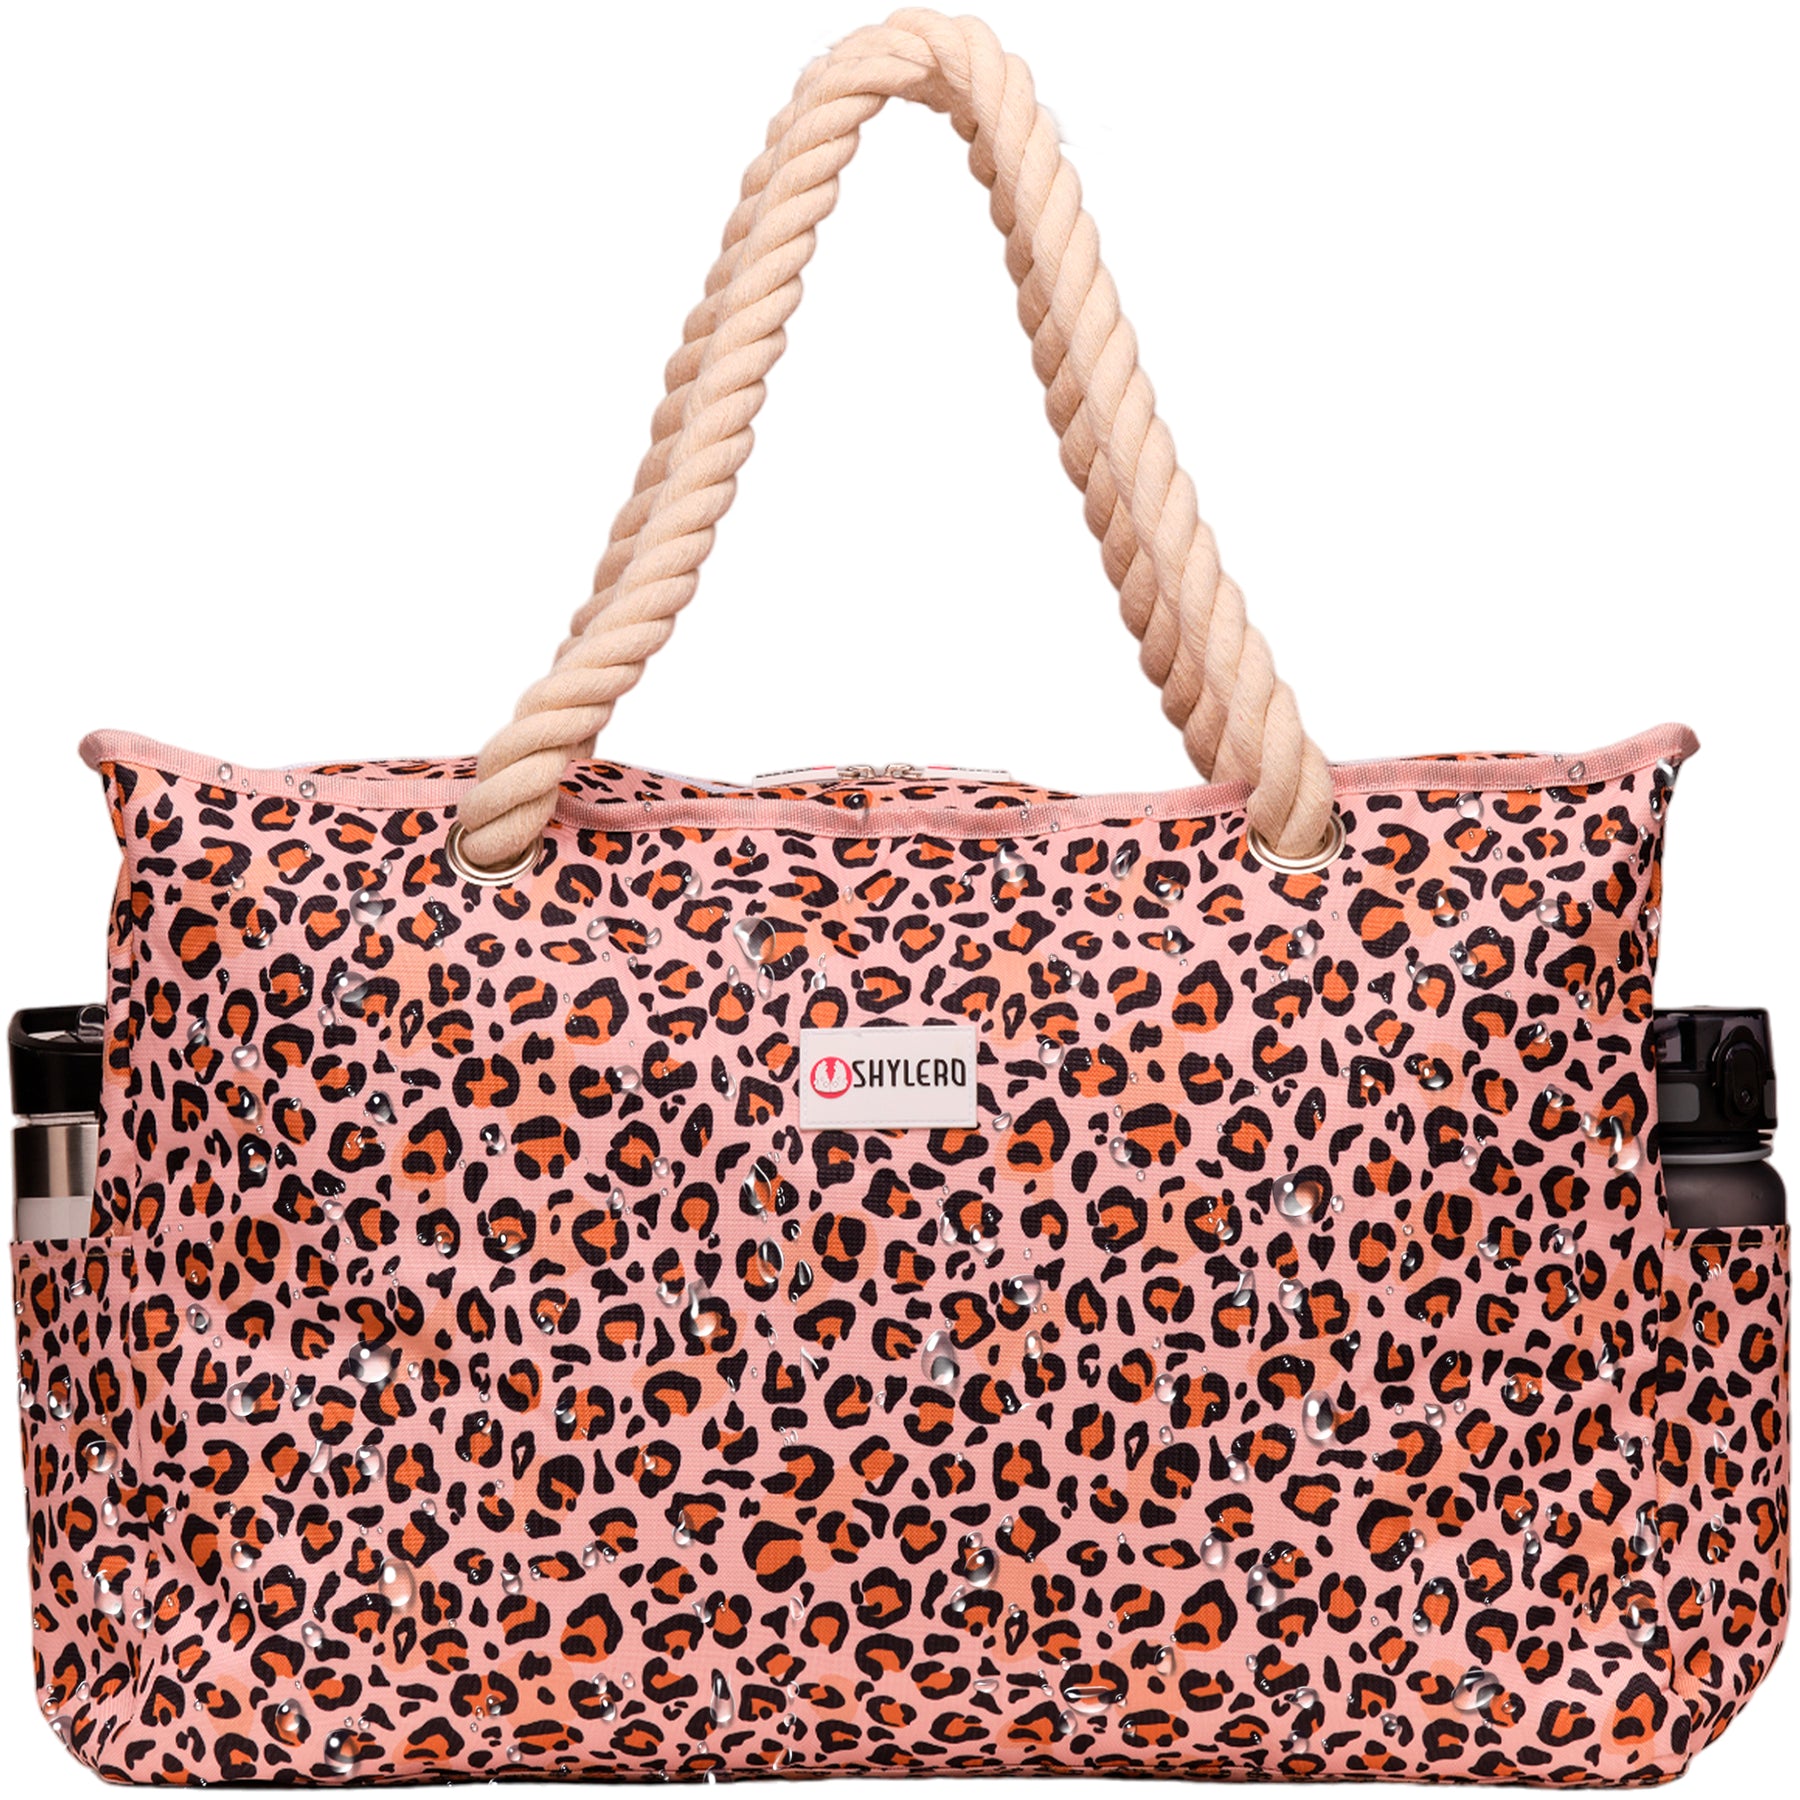 Beach Bag and Pool Bag | Water Repellent | Top YKK® Zip | Family Size | L22" x H15" x W6" | Leopard